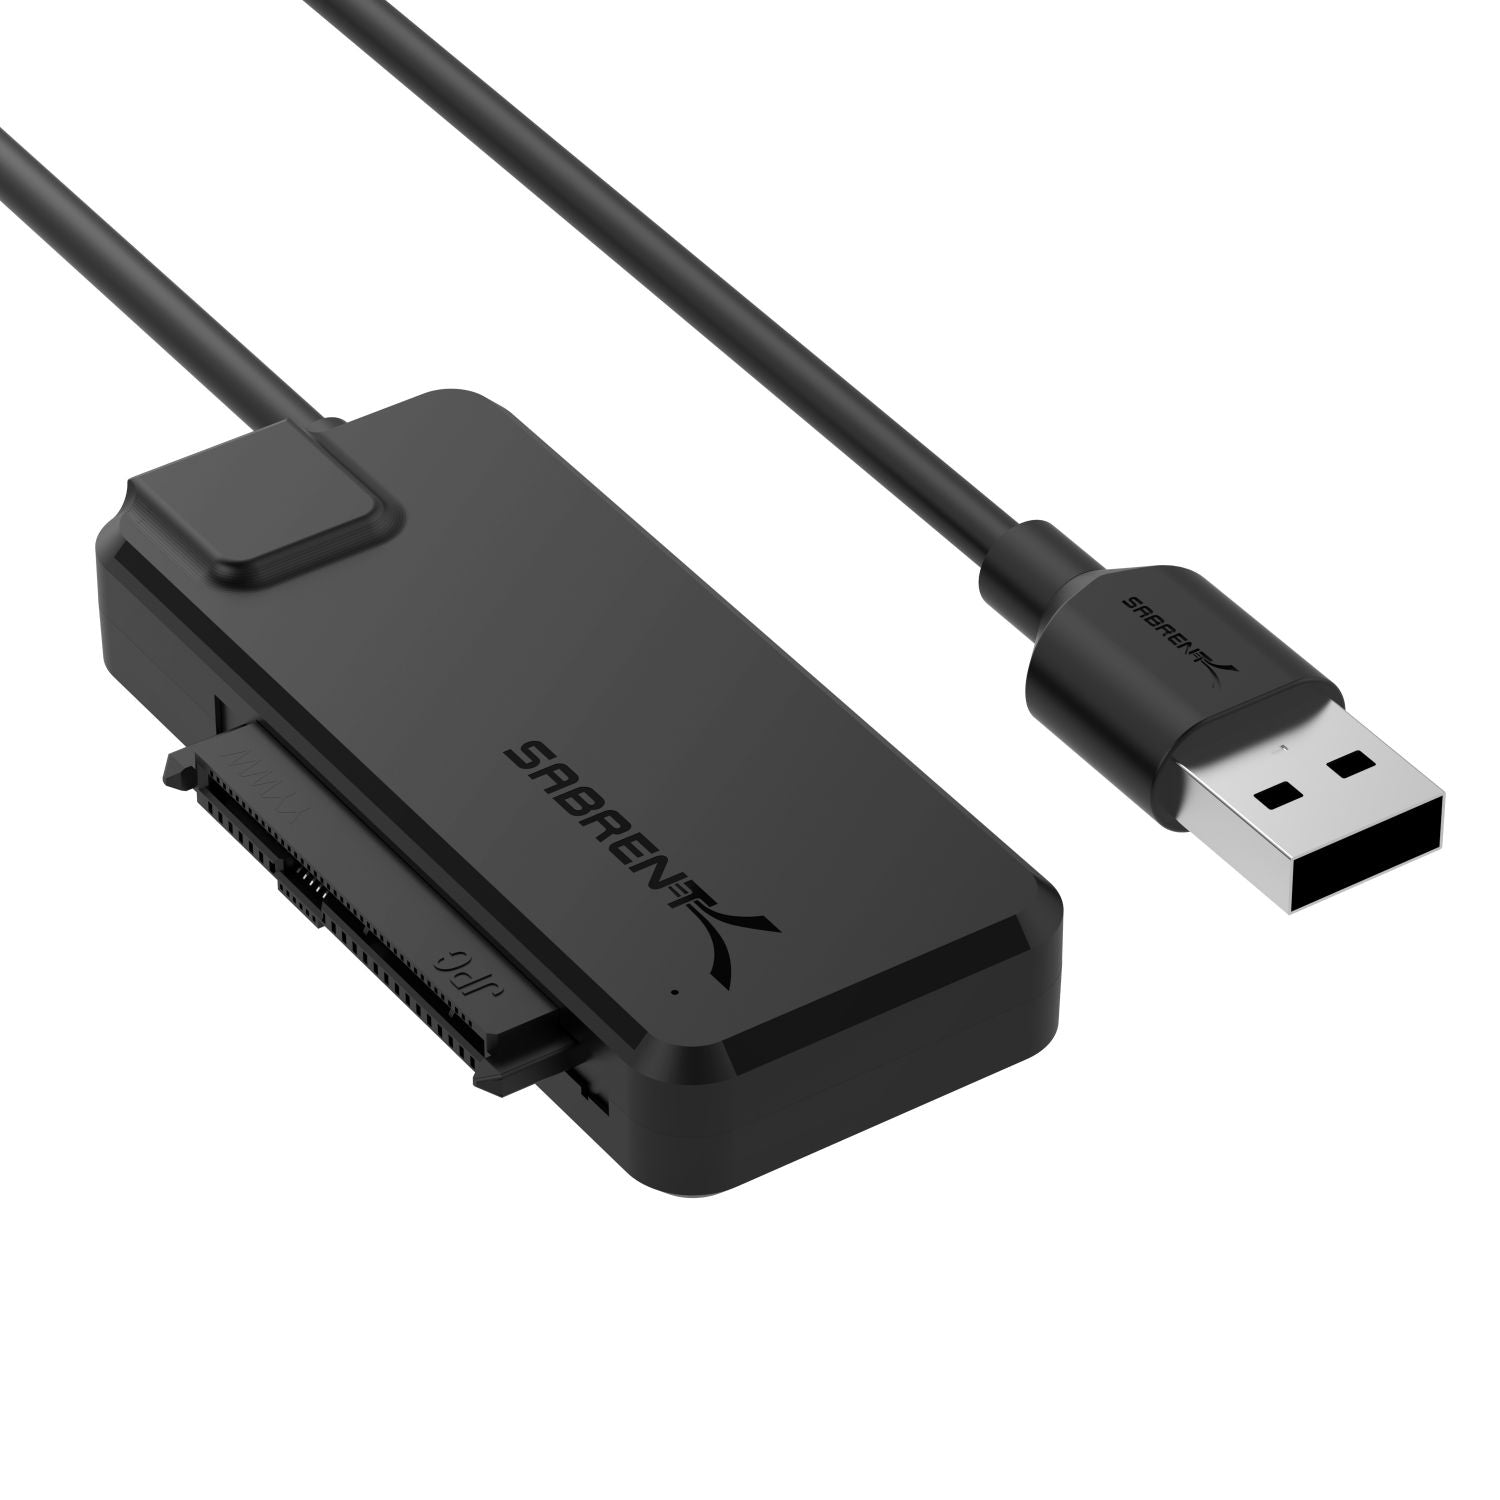 USB 3.2 Type A SATA/U.2 SSD Cable - Sabrent